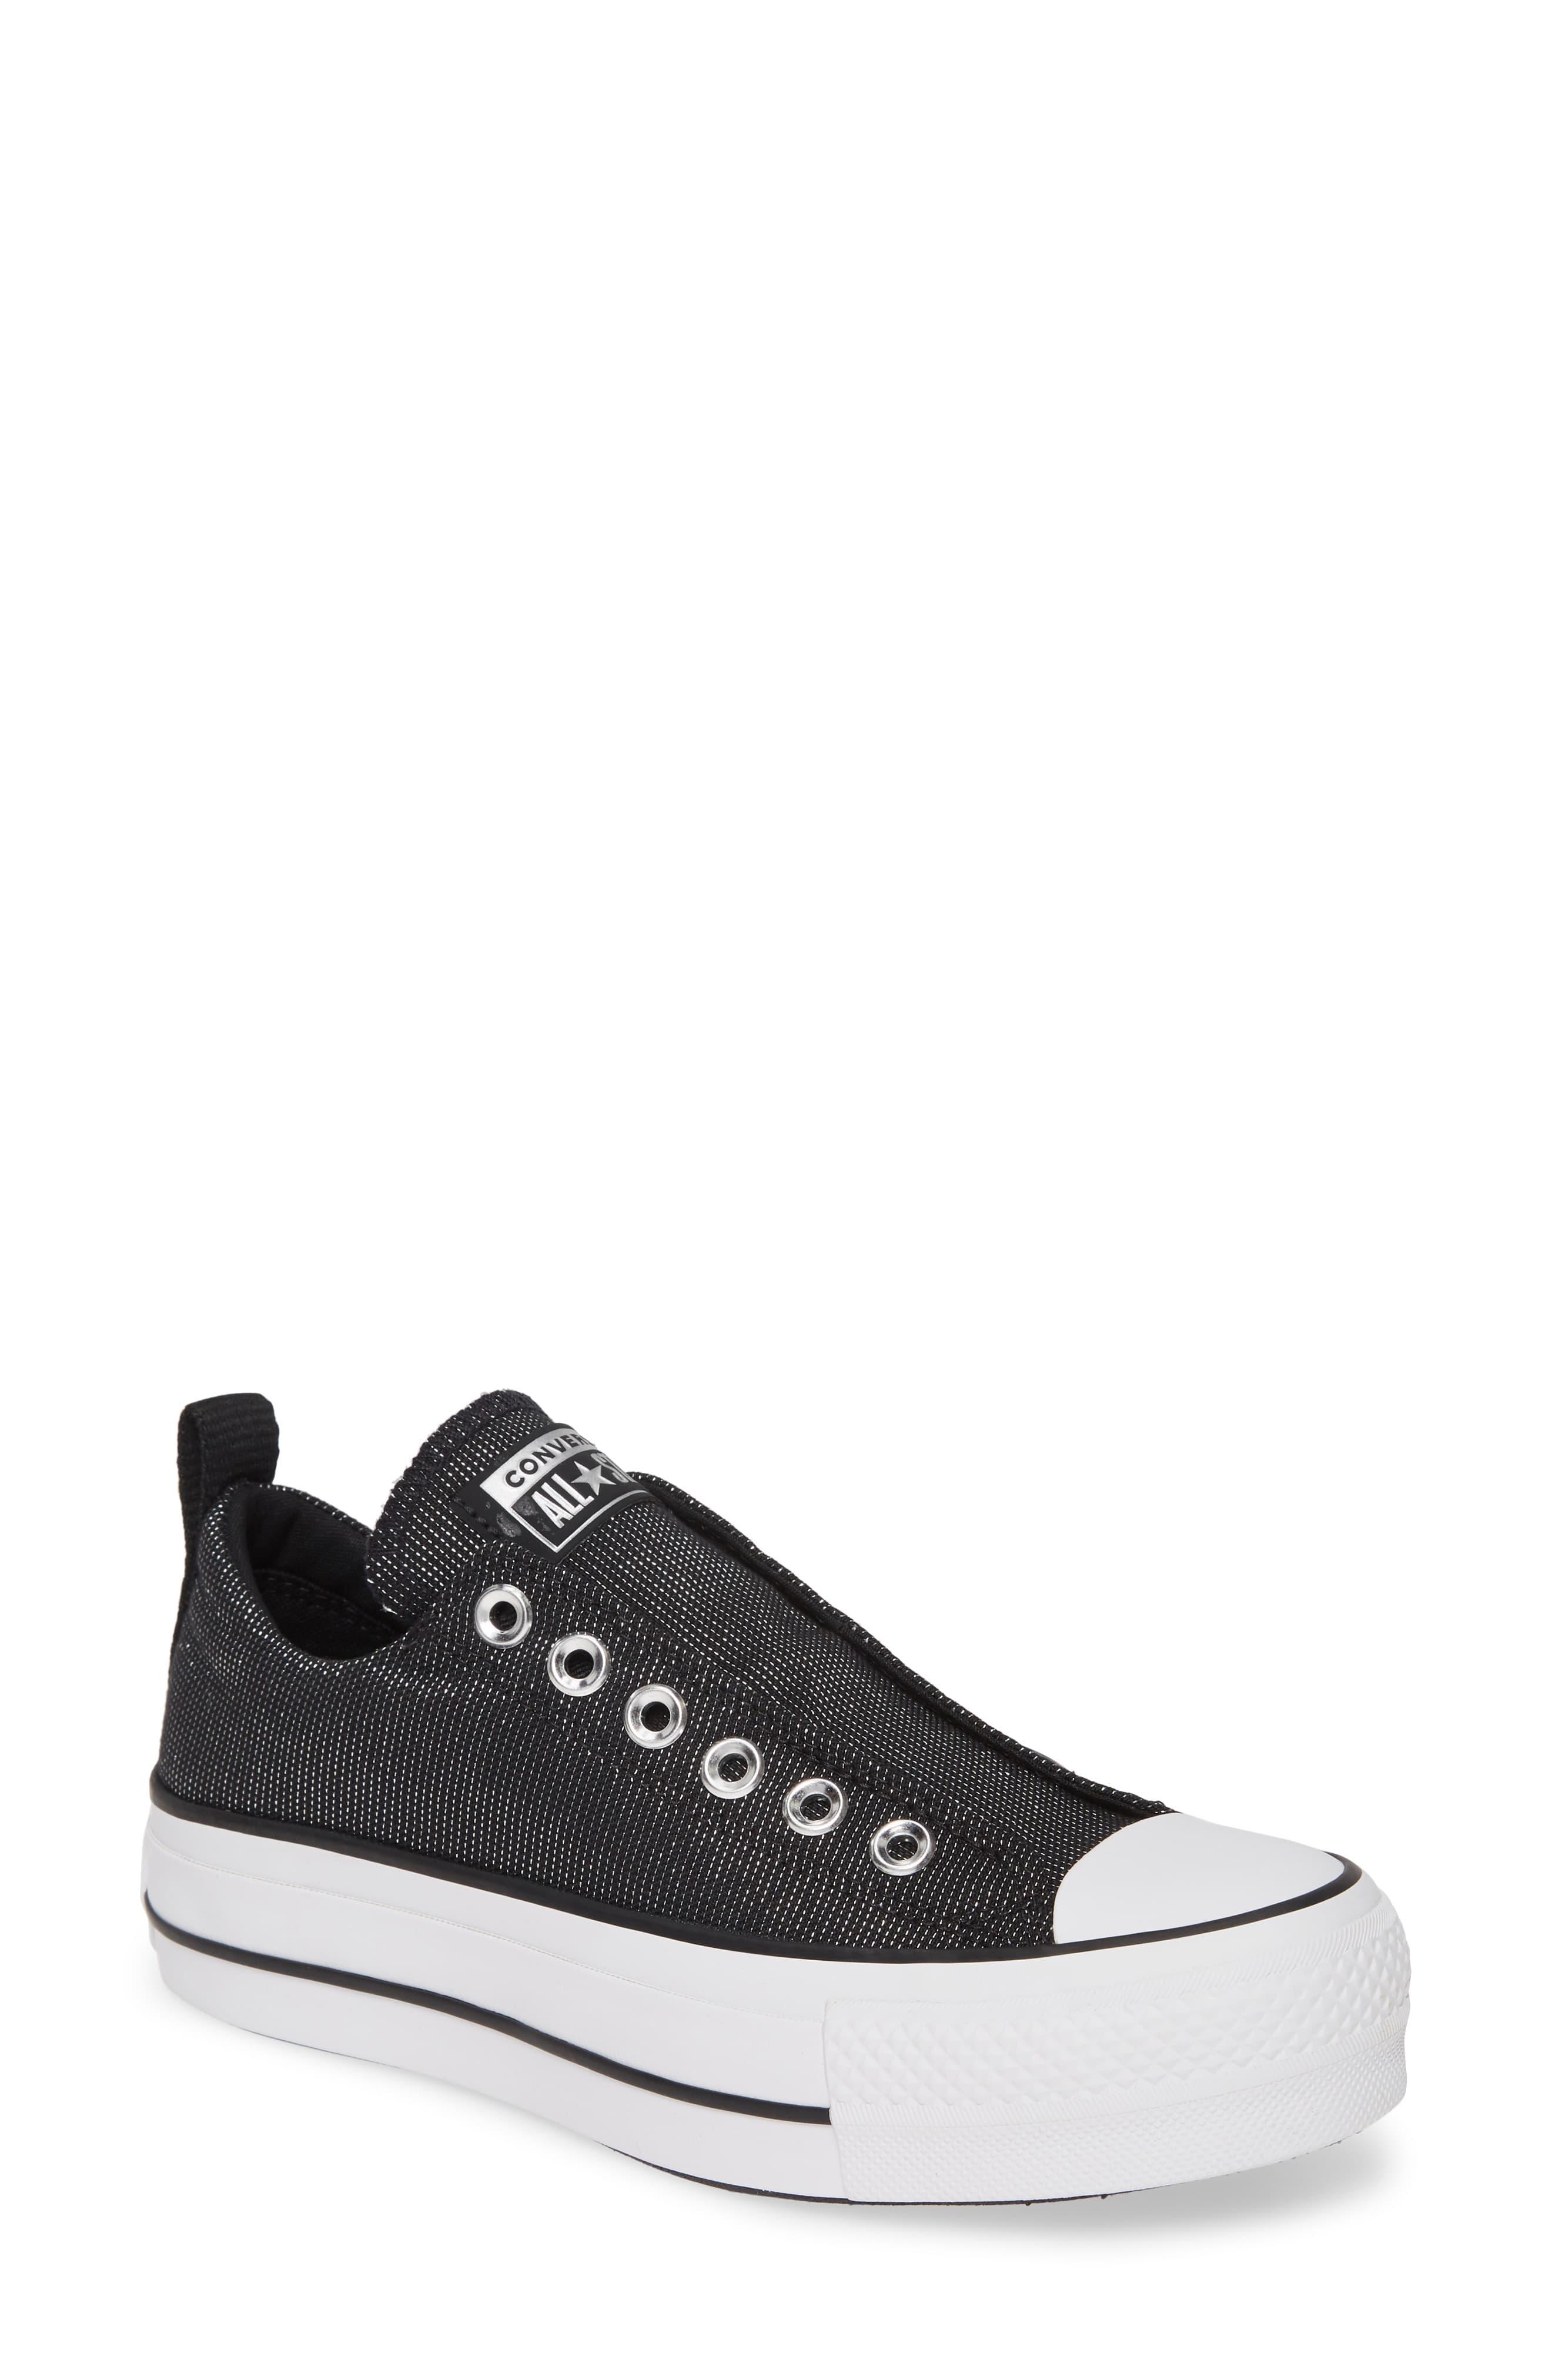 Converse Chuck Taylor All Star Lift Slip-on Sneaker in Black/ White ...